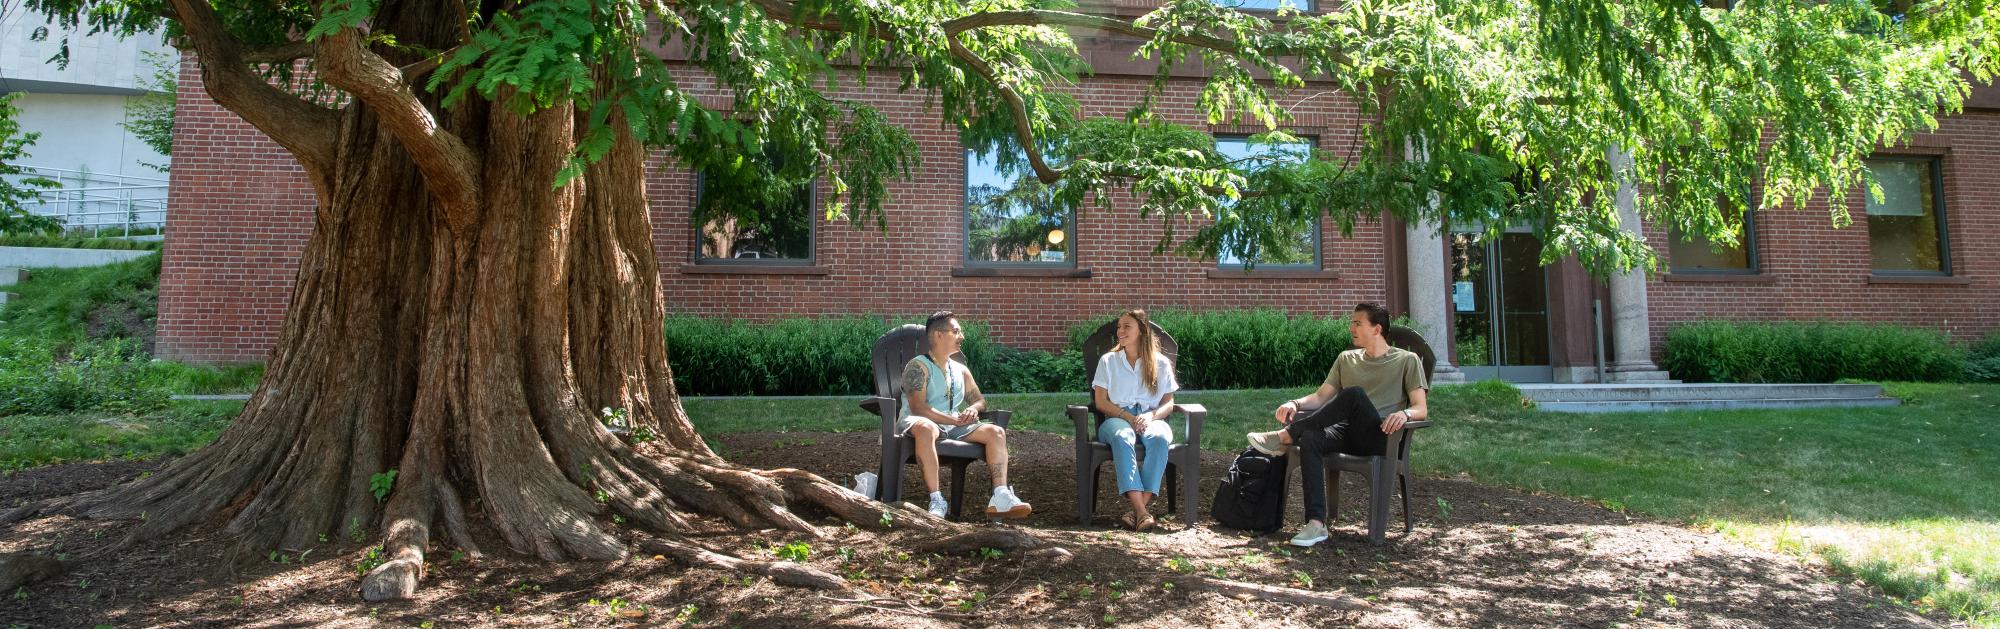 Three students sit in Adirondack chairs underneath a large tree in front of Nielson Library.